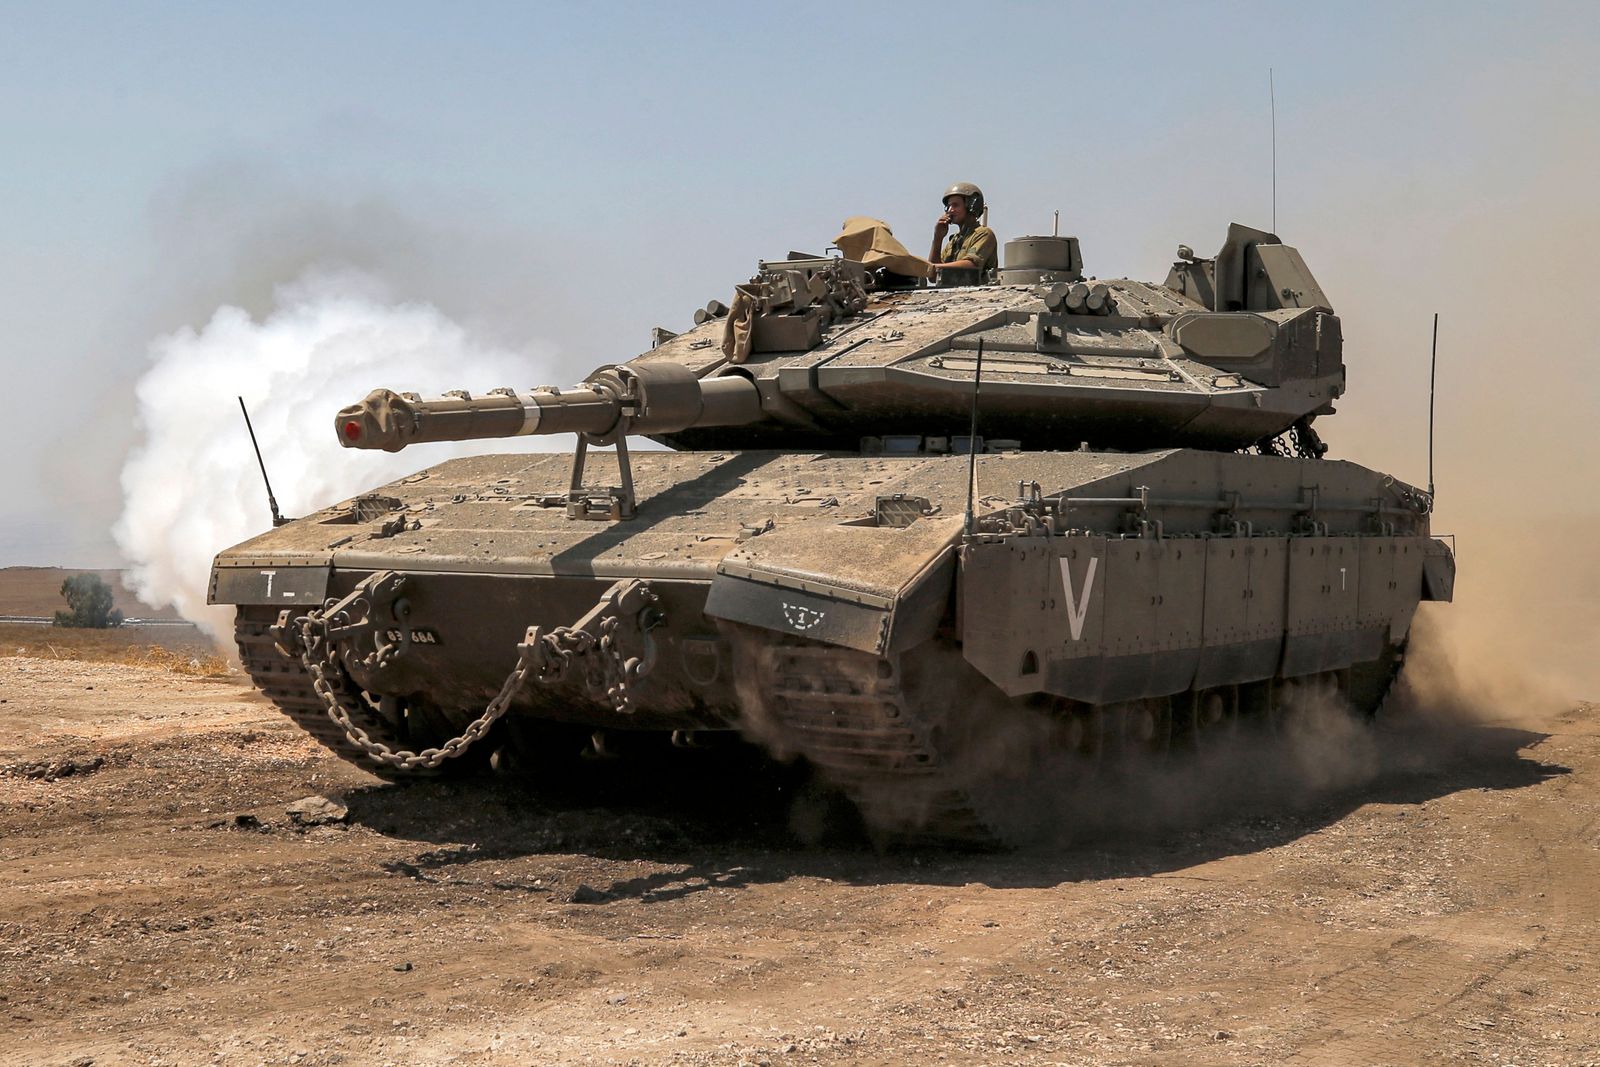 An Israeli Merkava Mark IV battle tank drives during an exercise in the Israeli-annexed Golan Heights near the border with Syria on August 29, 2022. (Photo by JALAA MAREY / AFP)